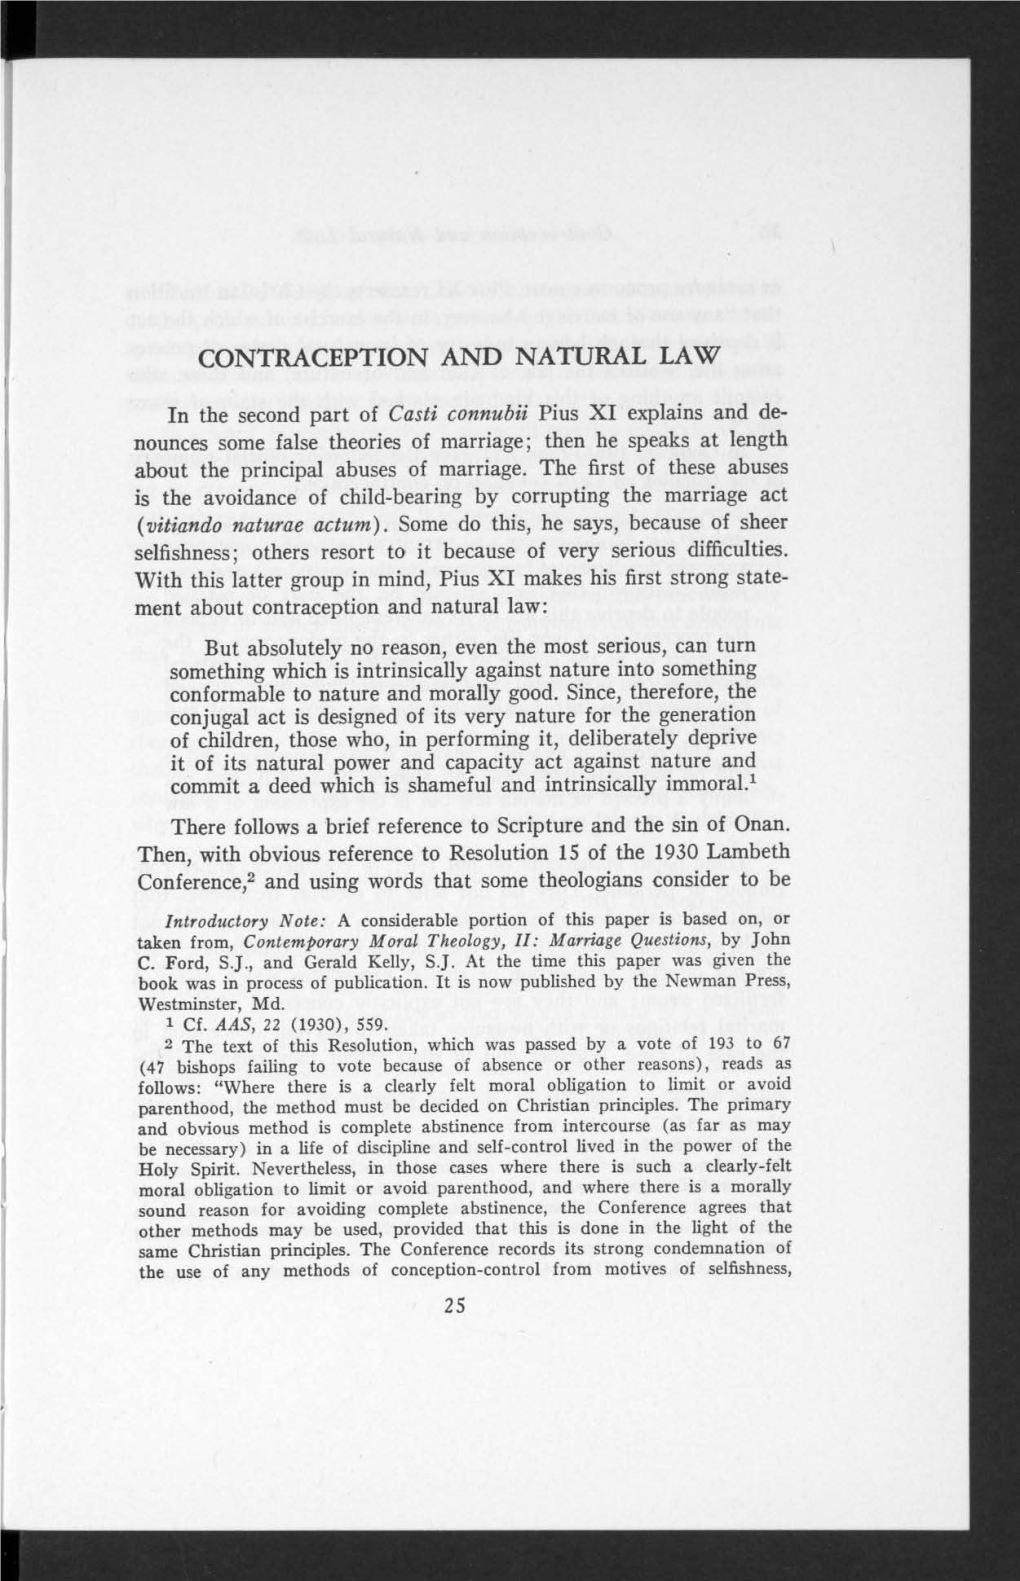 Contraception and Natural Law